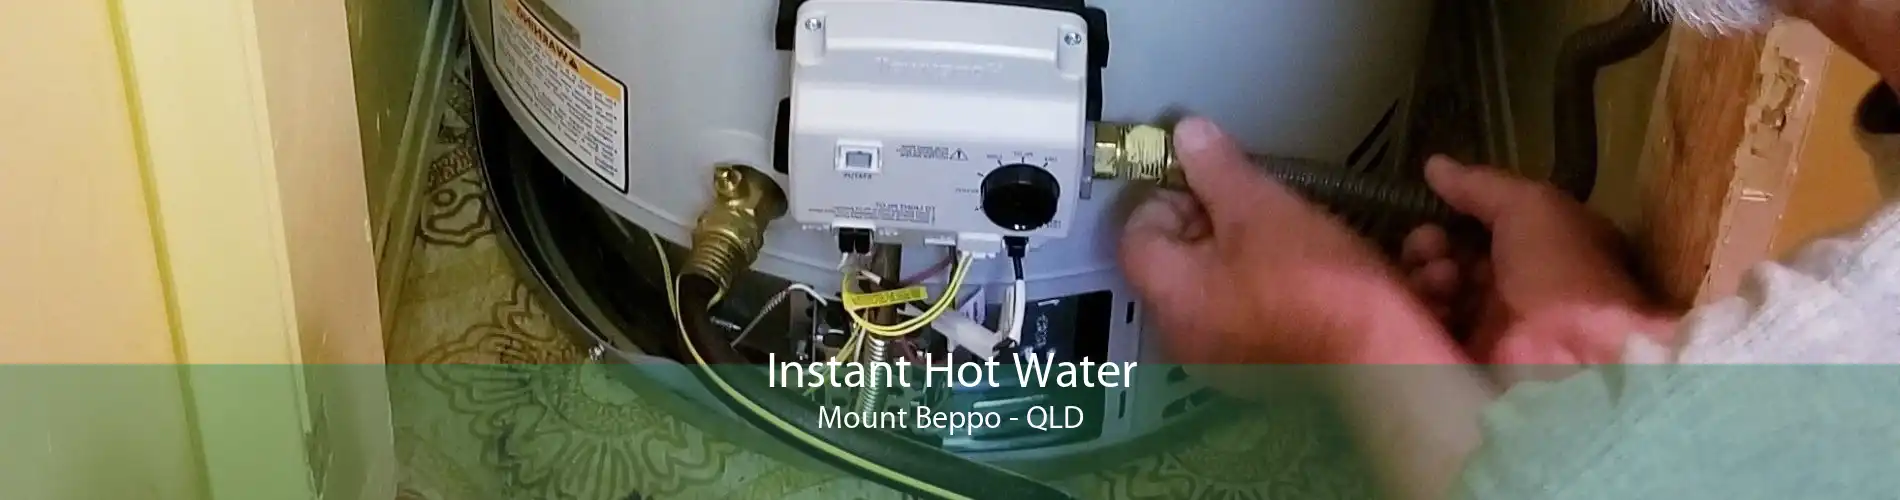 Instant Hot Water Mount Beppo - QLD